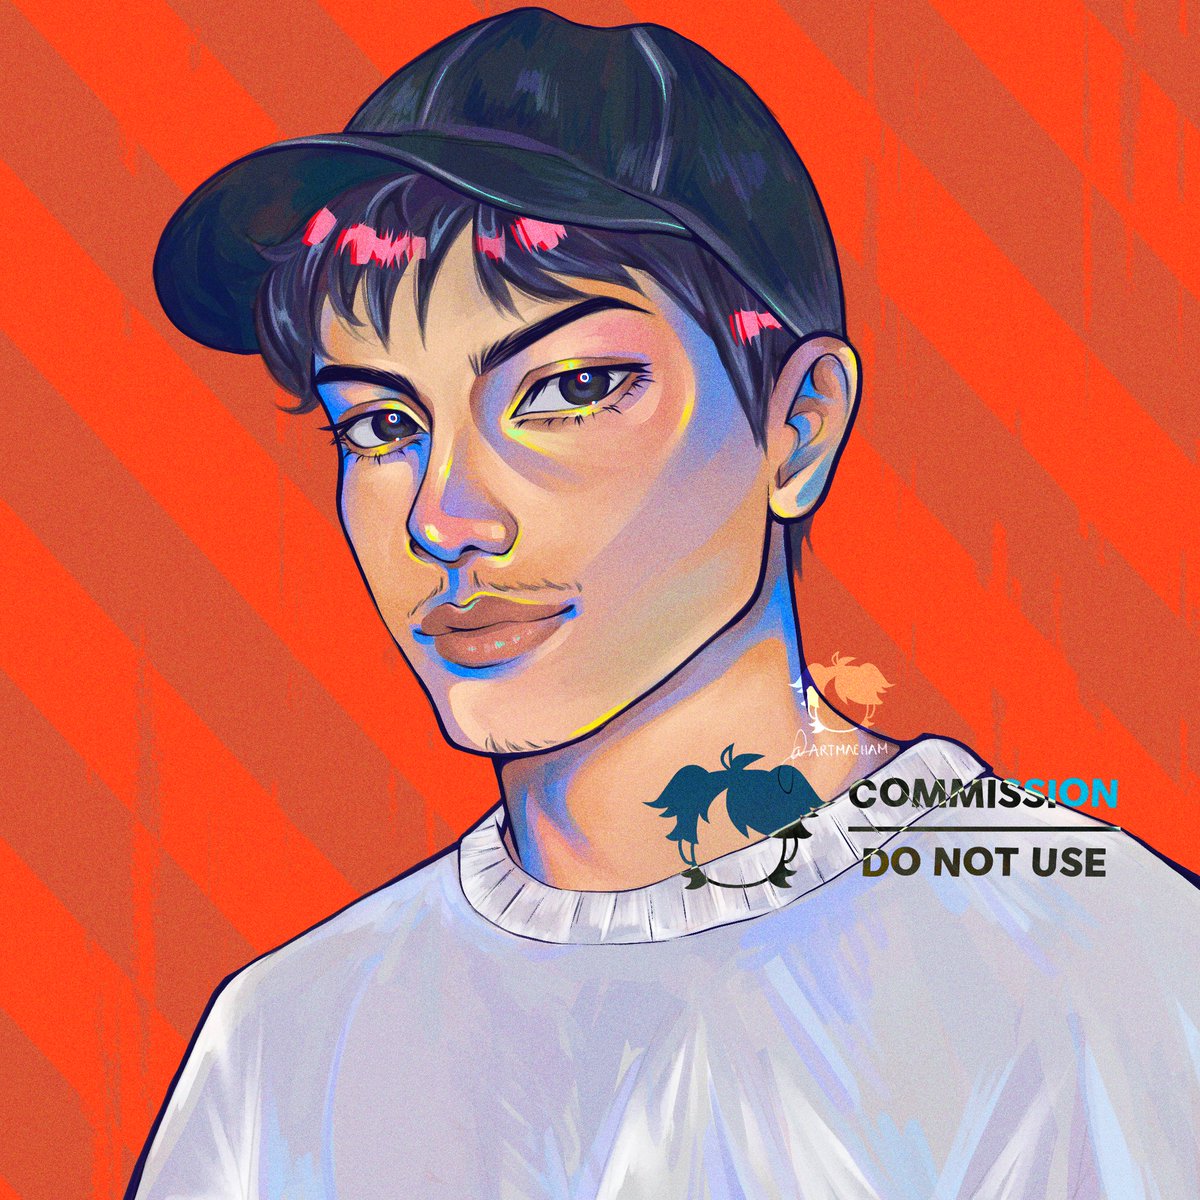 profile pic c()mmissi()n for the talented @theeemoquing 🧡
please go support their work too!!
#CLIPSTUDIOPAINT